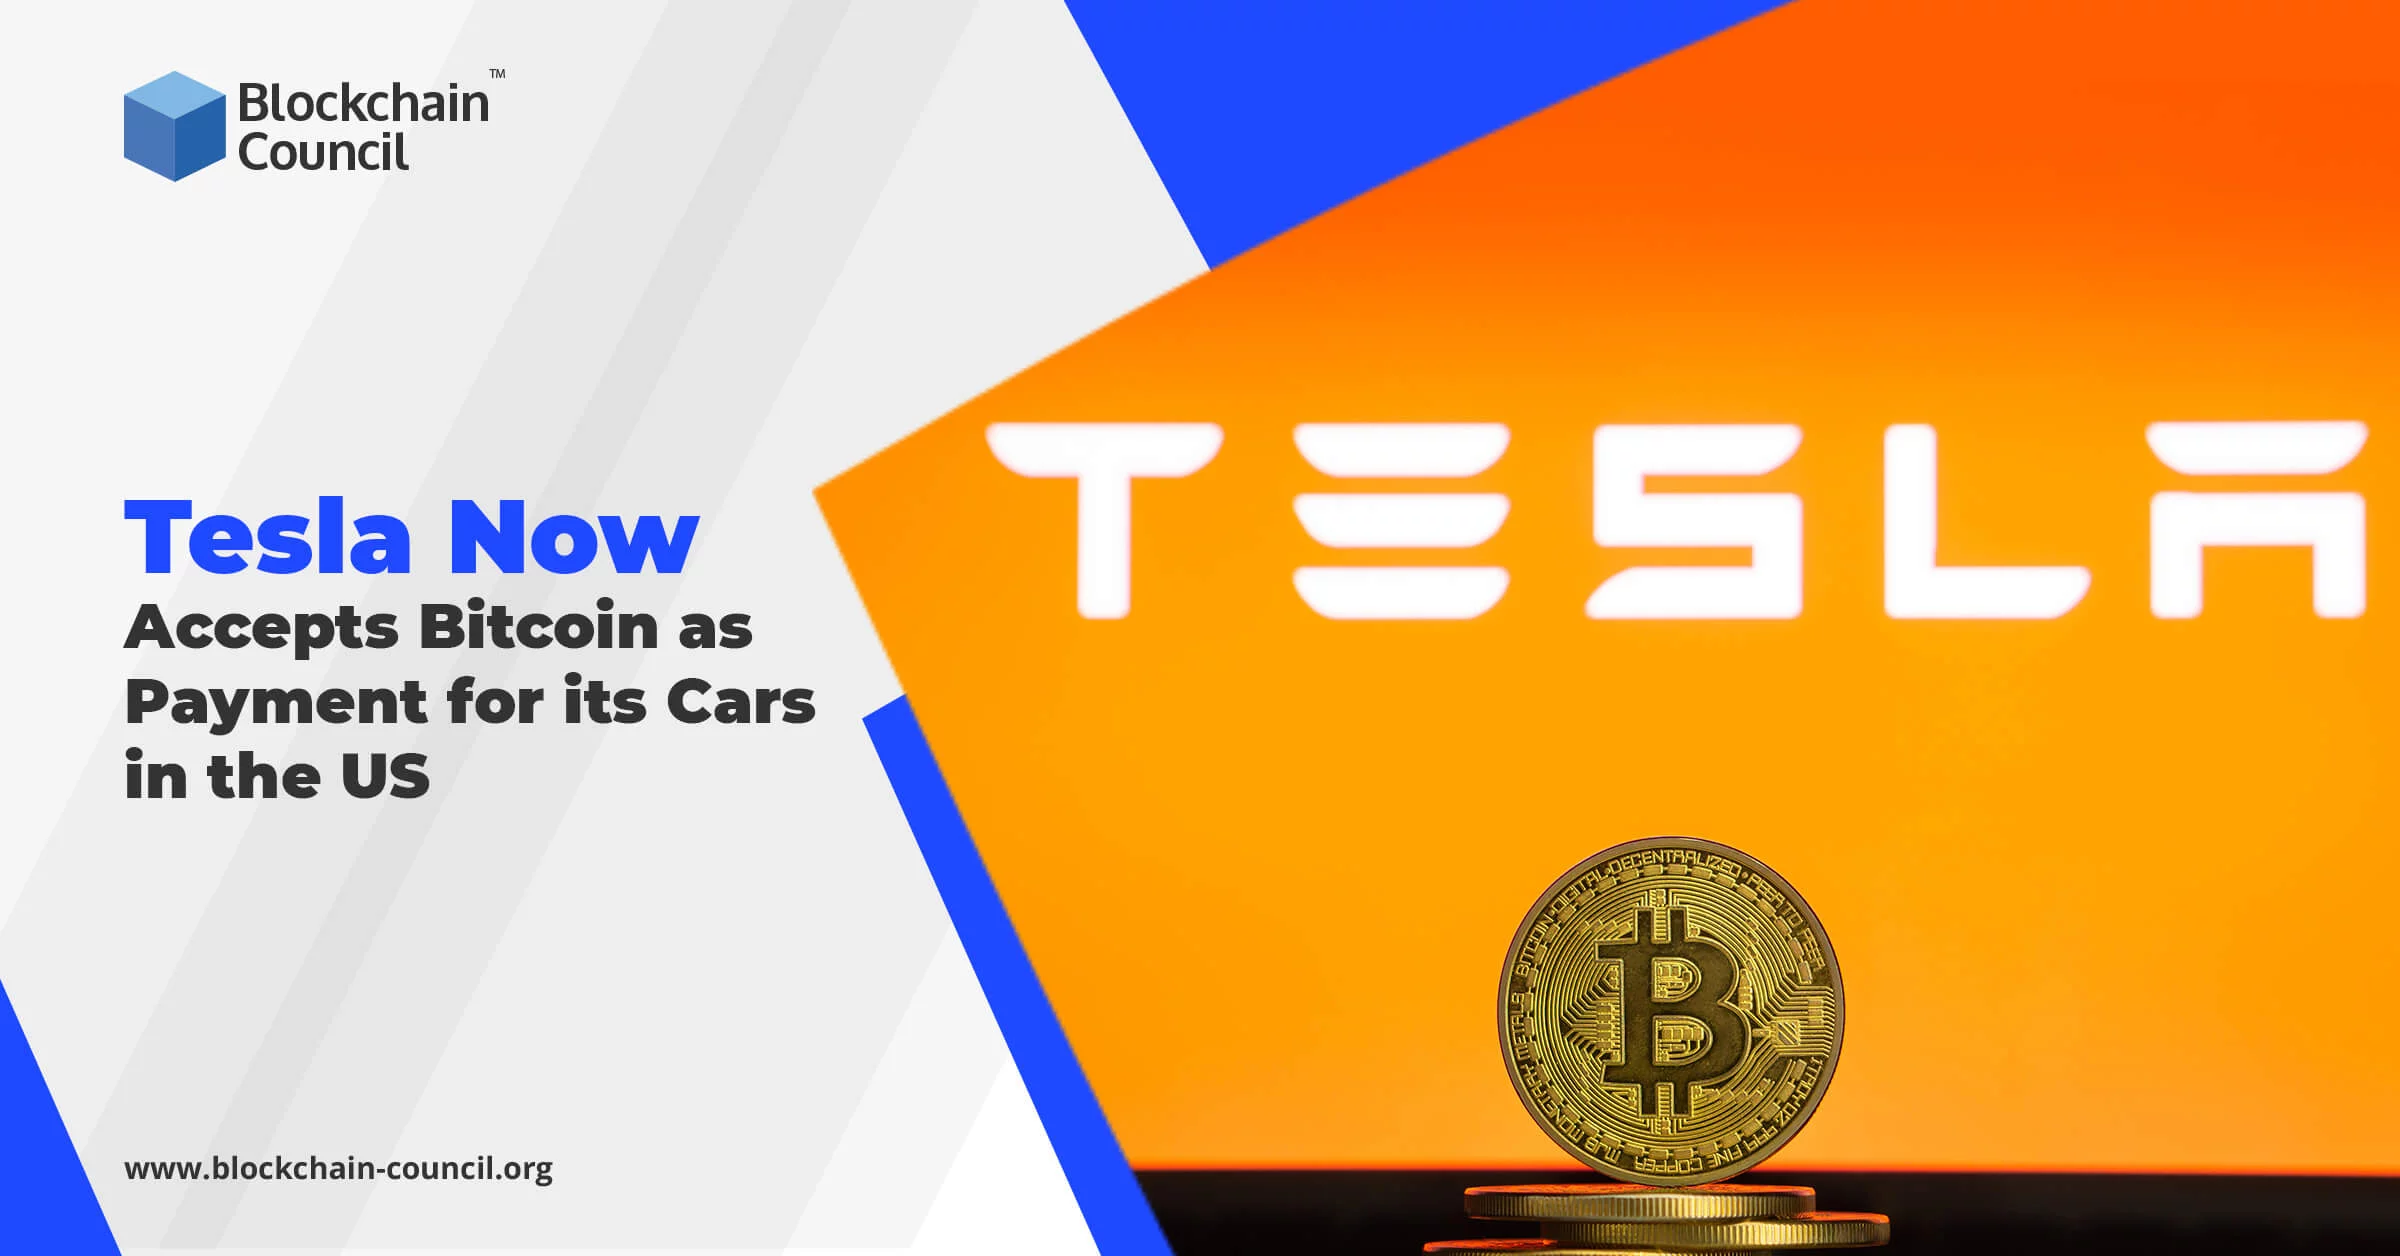 Tesla Now Accepts Bitcoin as Payment for its Cars in the US